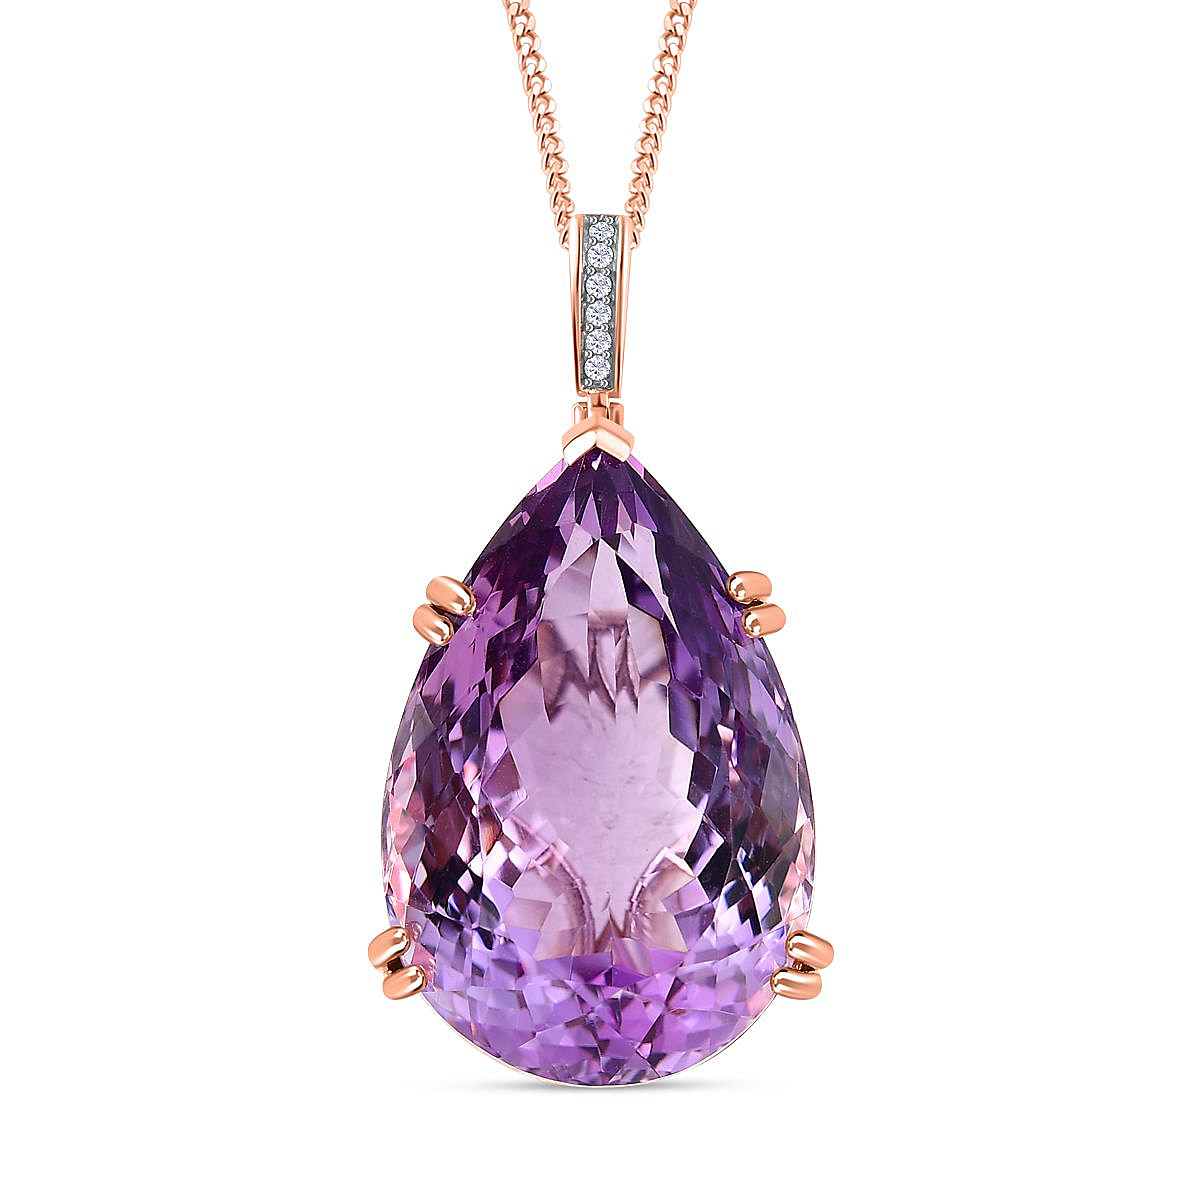 Rose De France Amethyst & Natural Zircon Pendant with Curb Chain (Size 20) in 18K Vermeil RG Plated Sterling Silver 51.60 Ct, SIilver Wt. 11.30 Gms